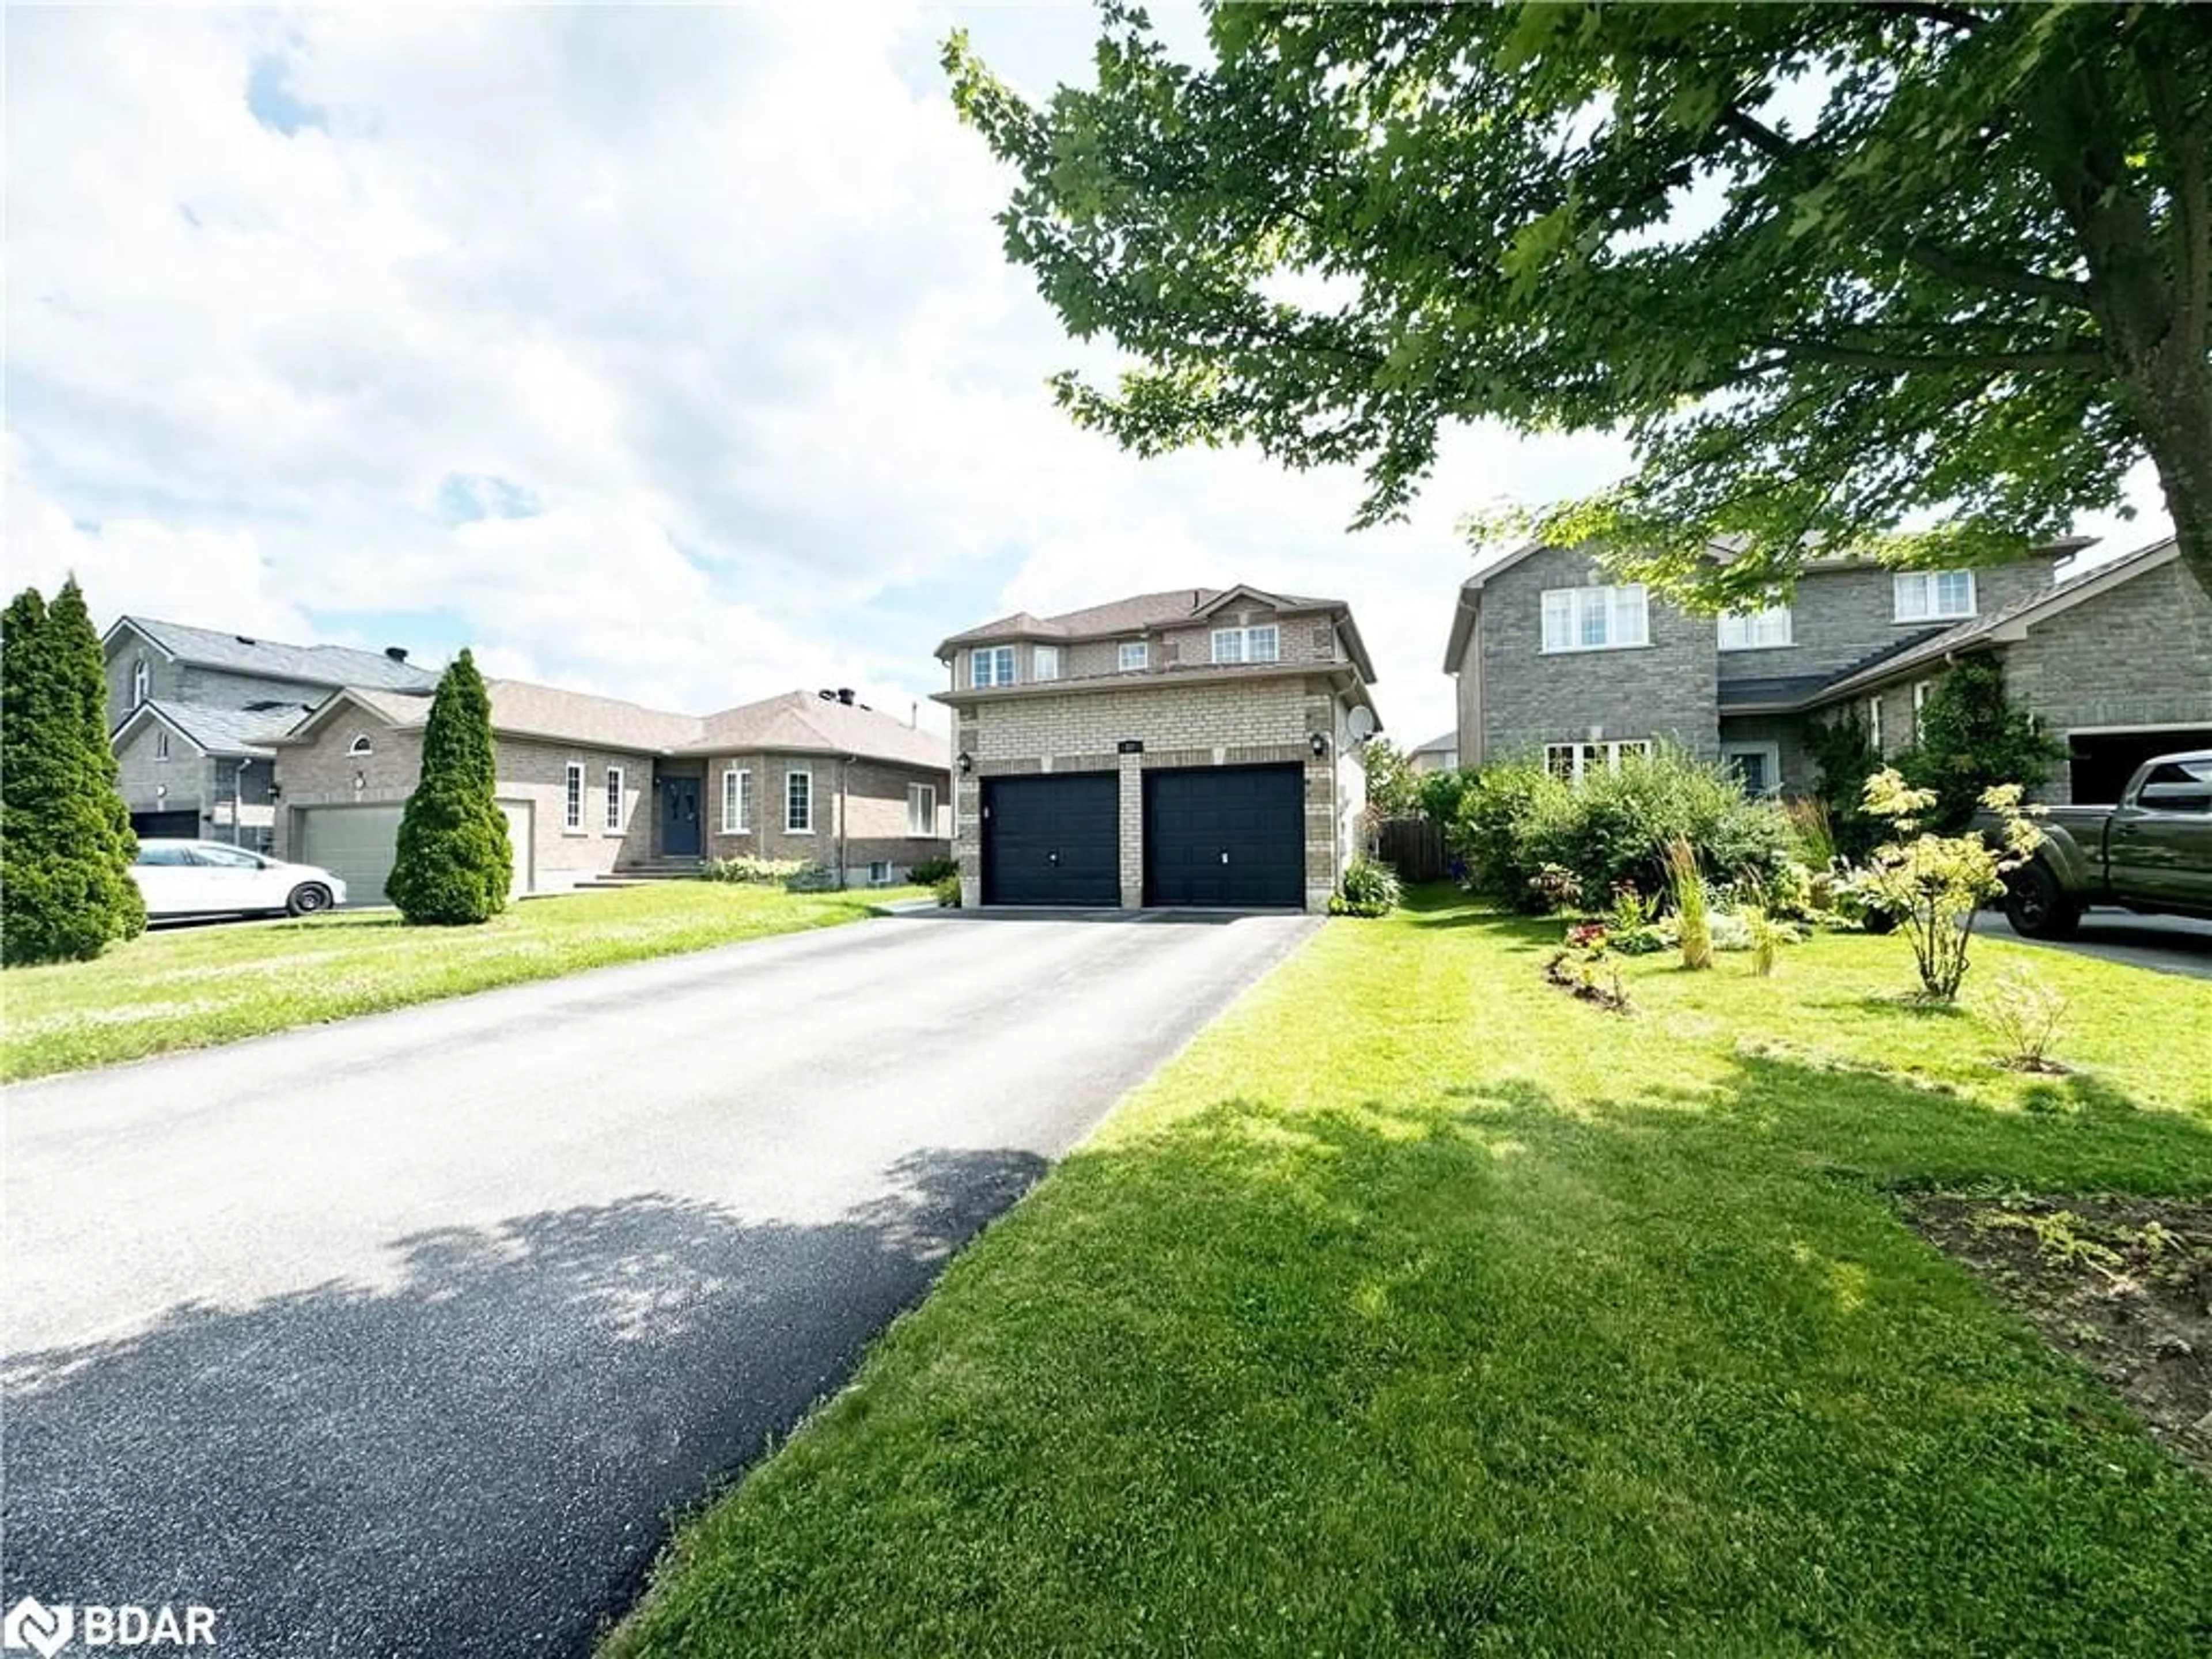 Frontside or backside of a home for 57 Penvill Trail, Barrie Ontario L4N 5M8